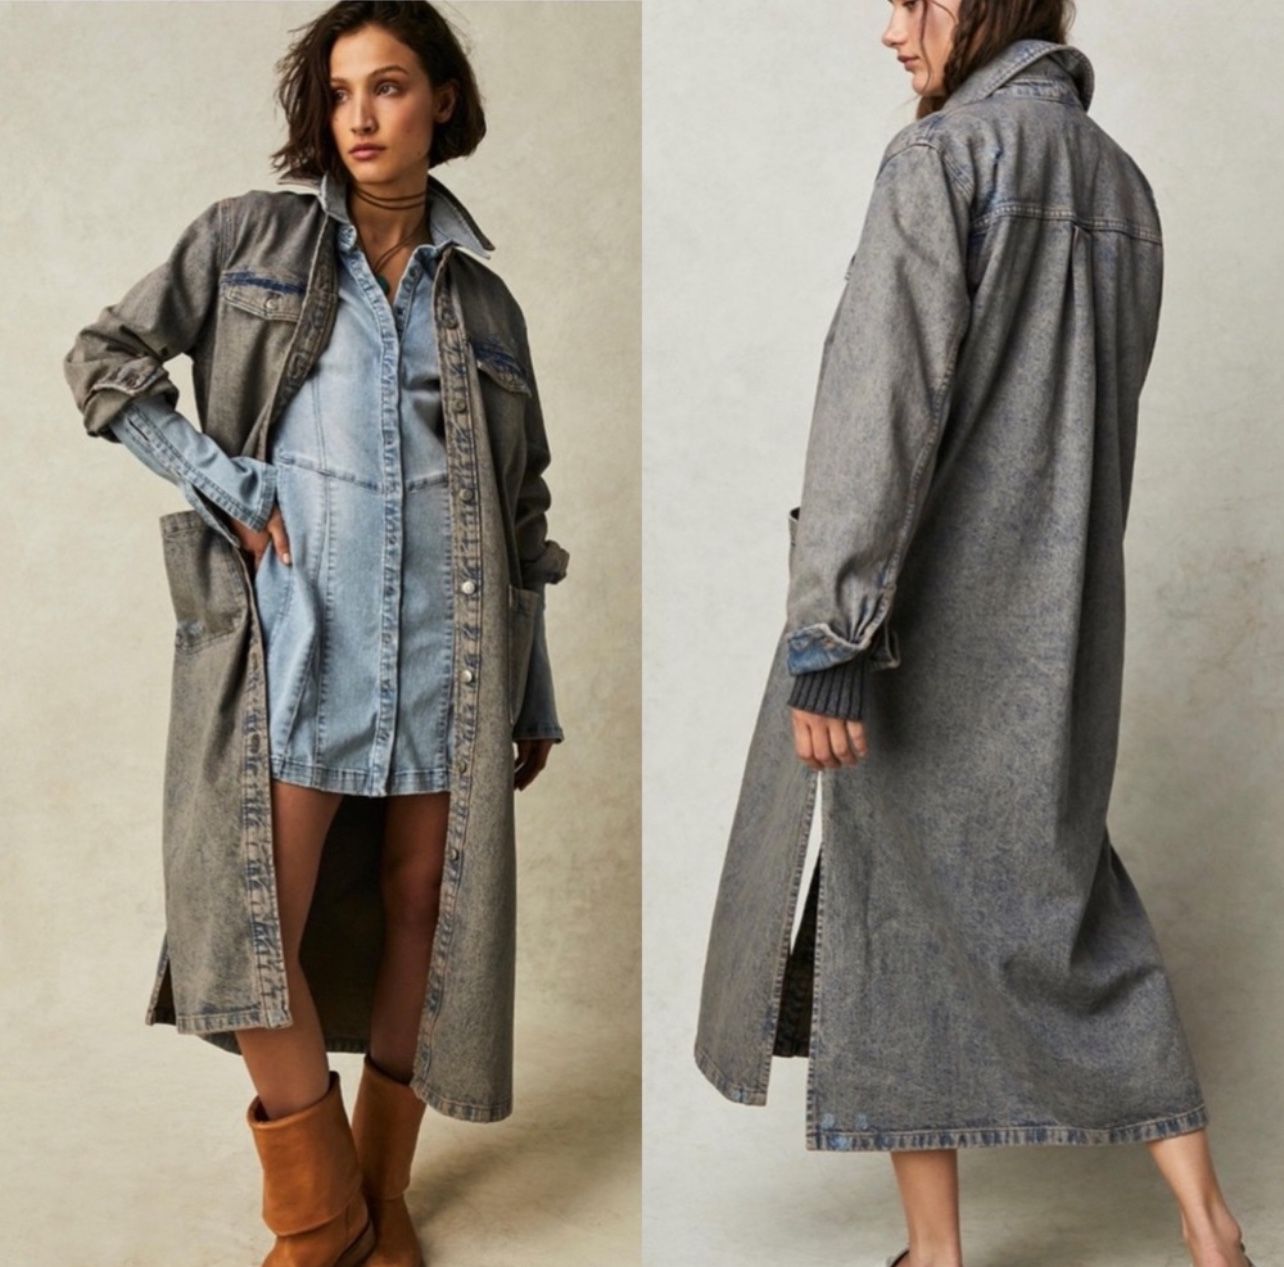 RARE sold out online   NWOT Free People Anna Lou LONG MAXI Denim Duster jacket  Size S  Distressed style triple washed denim. Lightweight and soft  Ca